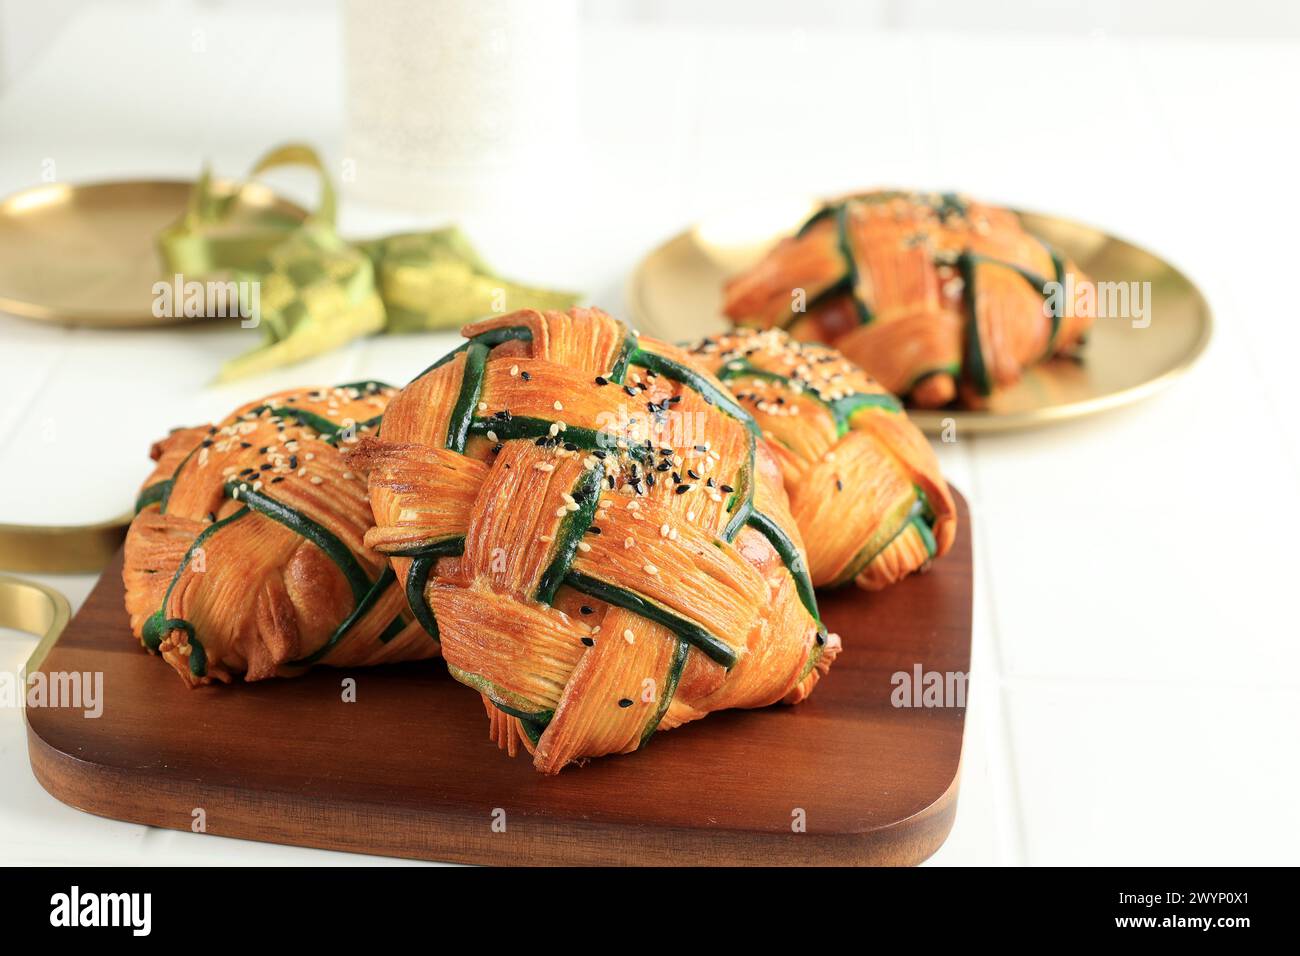 Cropat Croissant Ketupat, Pastry with Beef rendang Filling for Eid al Fitr Celebration, Viral Food in Indonesia and Malaysia Stock Photo